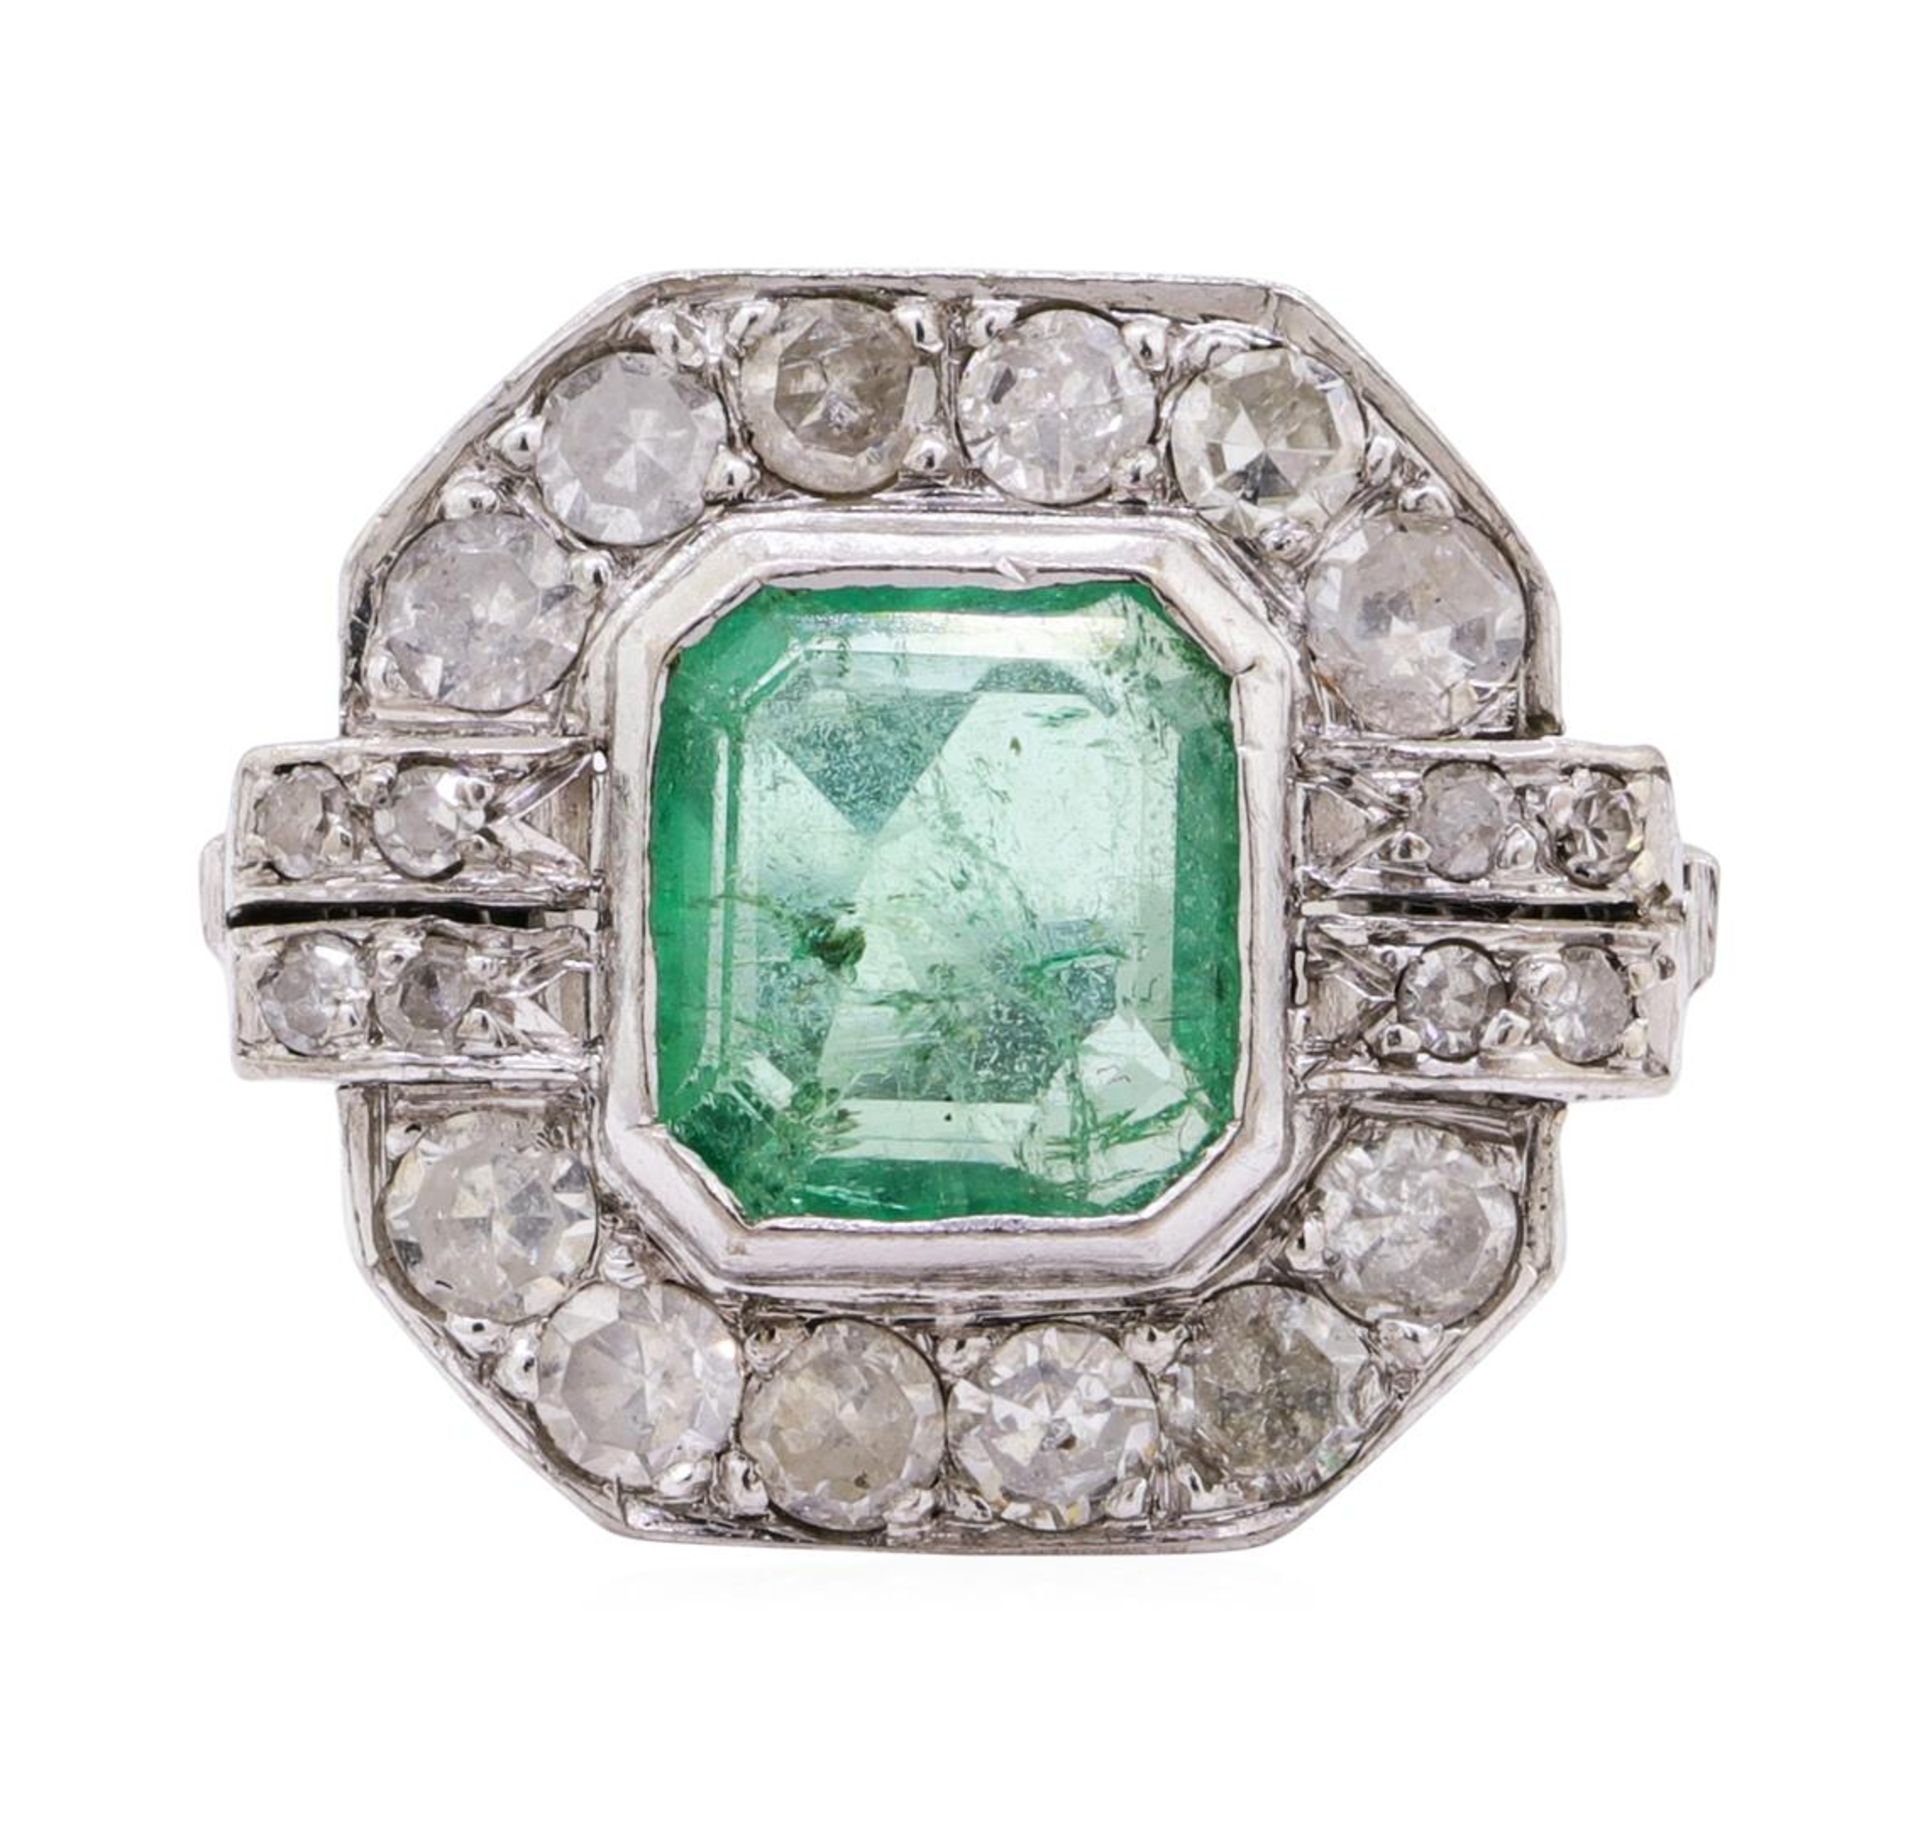 7.80 ctw Emerald And Diamond Ring And Earrings - 14KT White Gold - Image 2 of 7